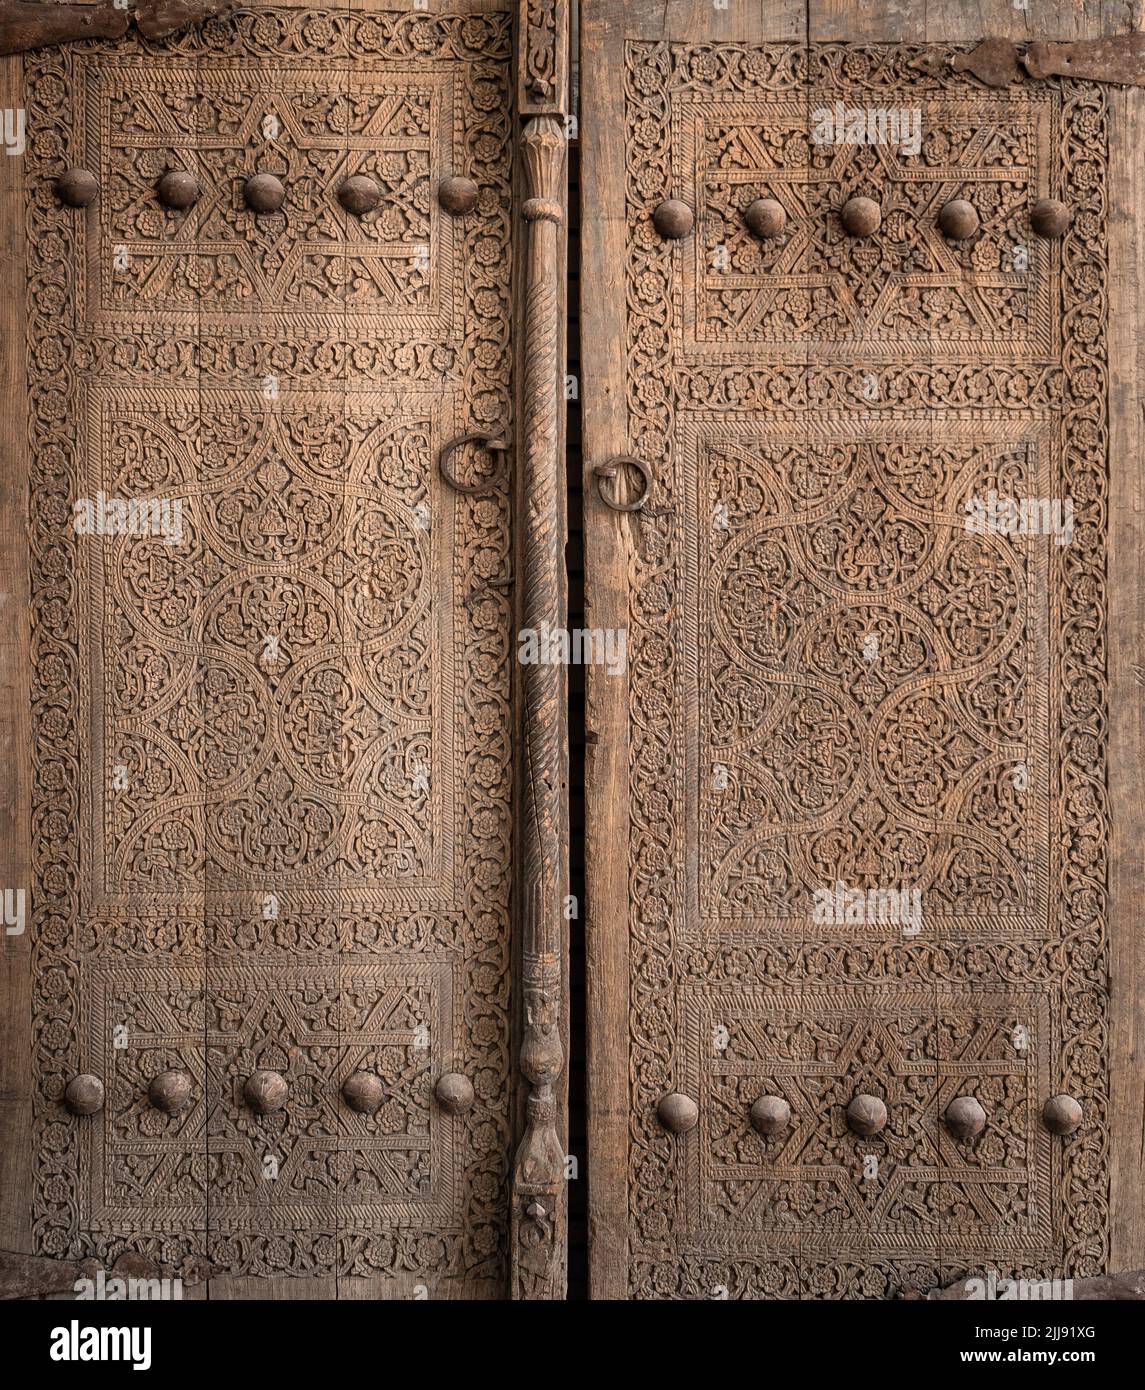 Close-up image of ancient doors with oriental ornaments Stock Photo